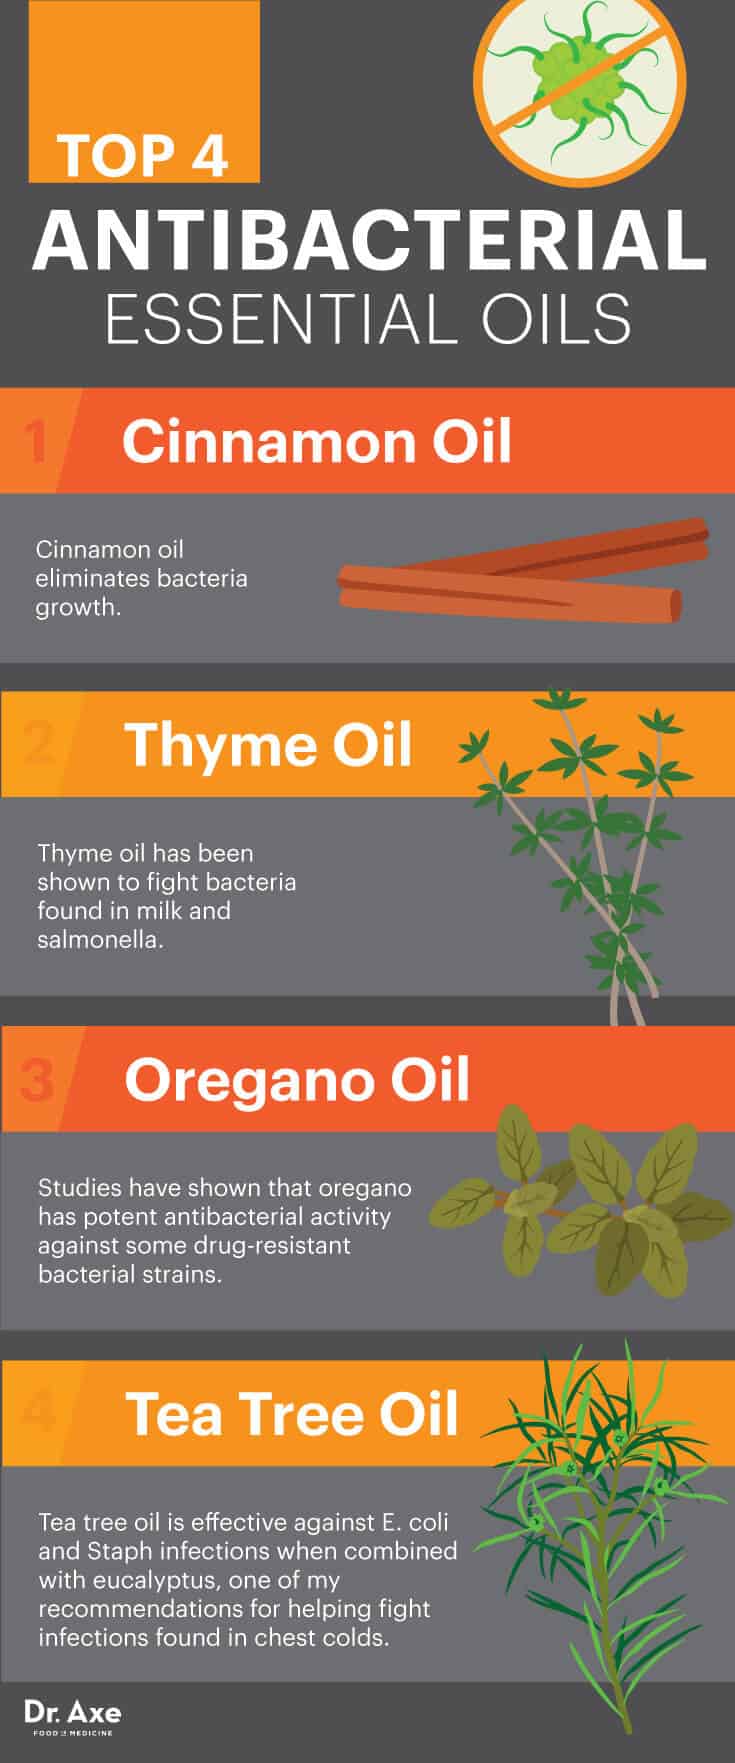 Top four antibacterial essential oils - Dr. Axe